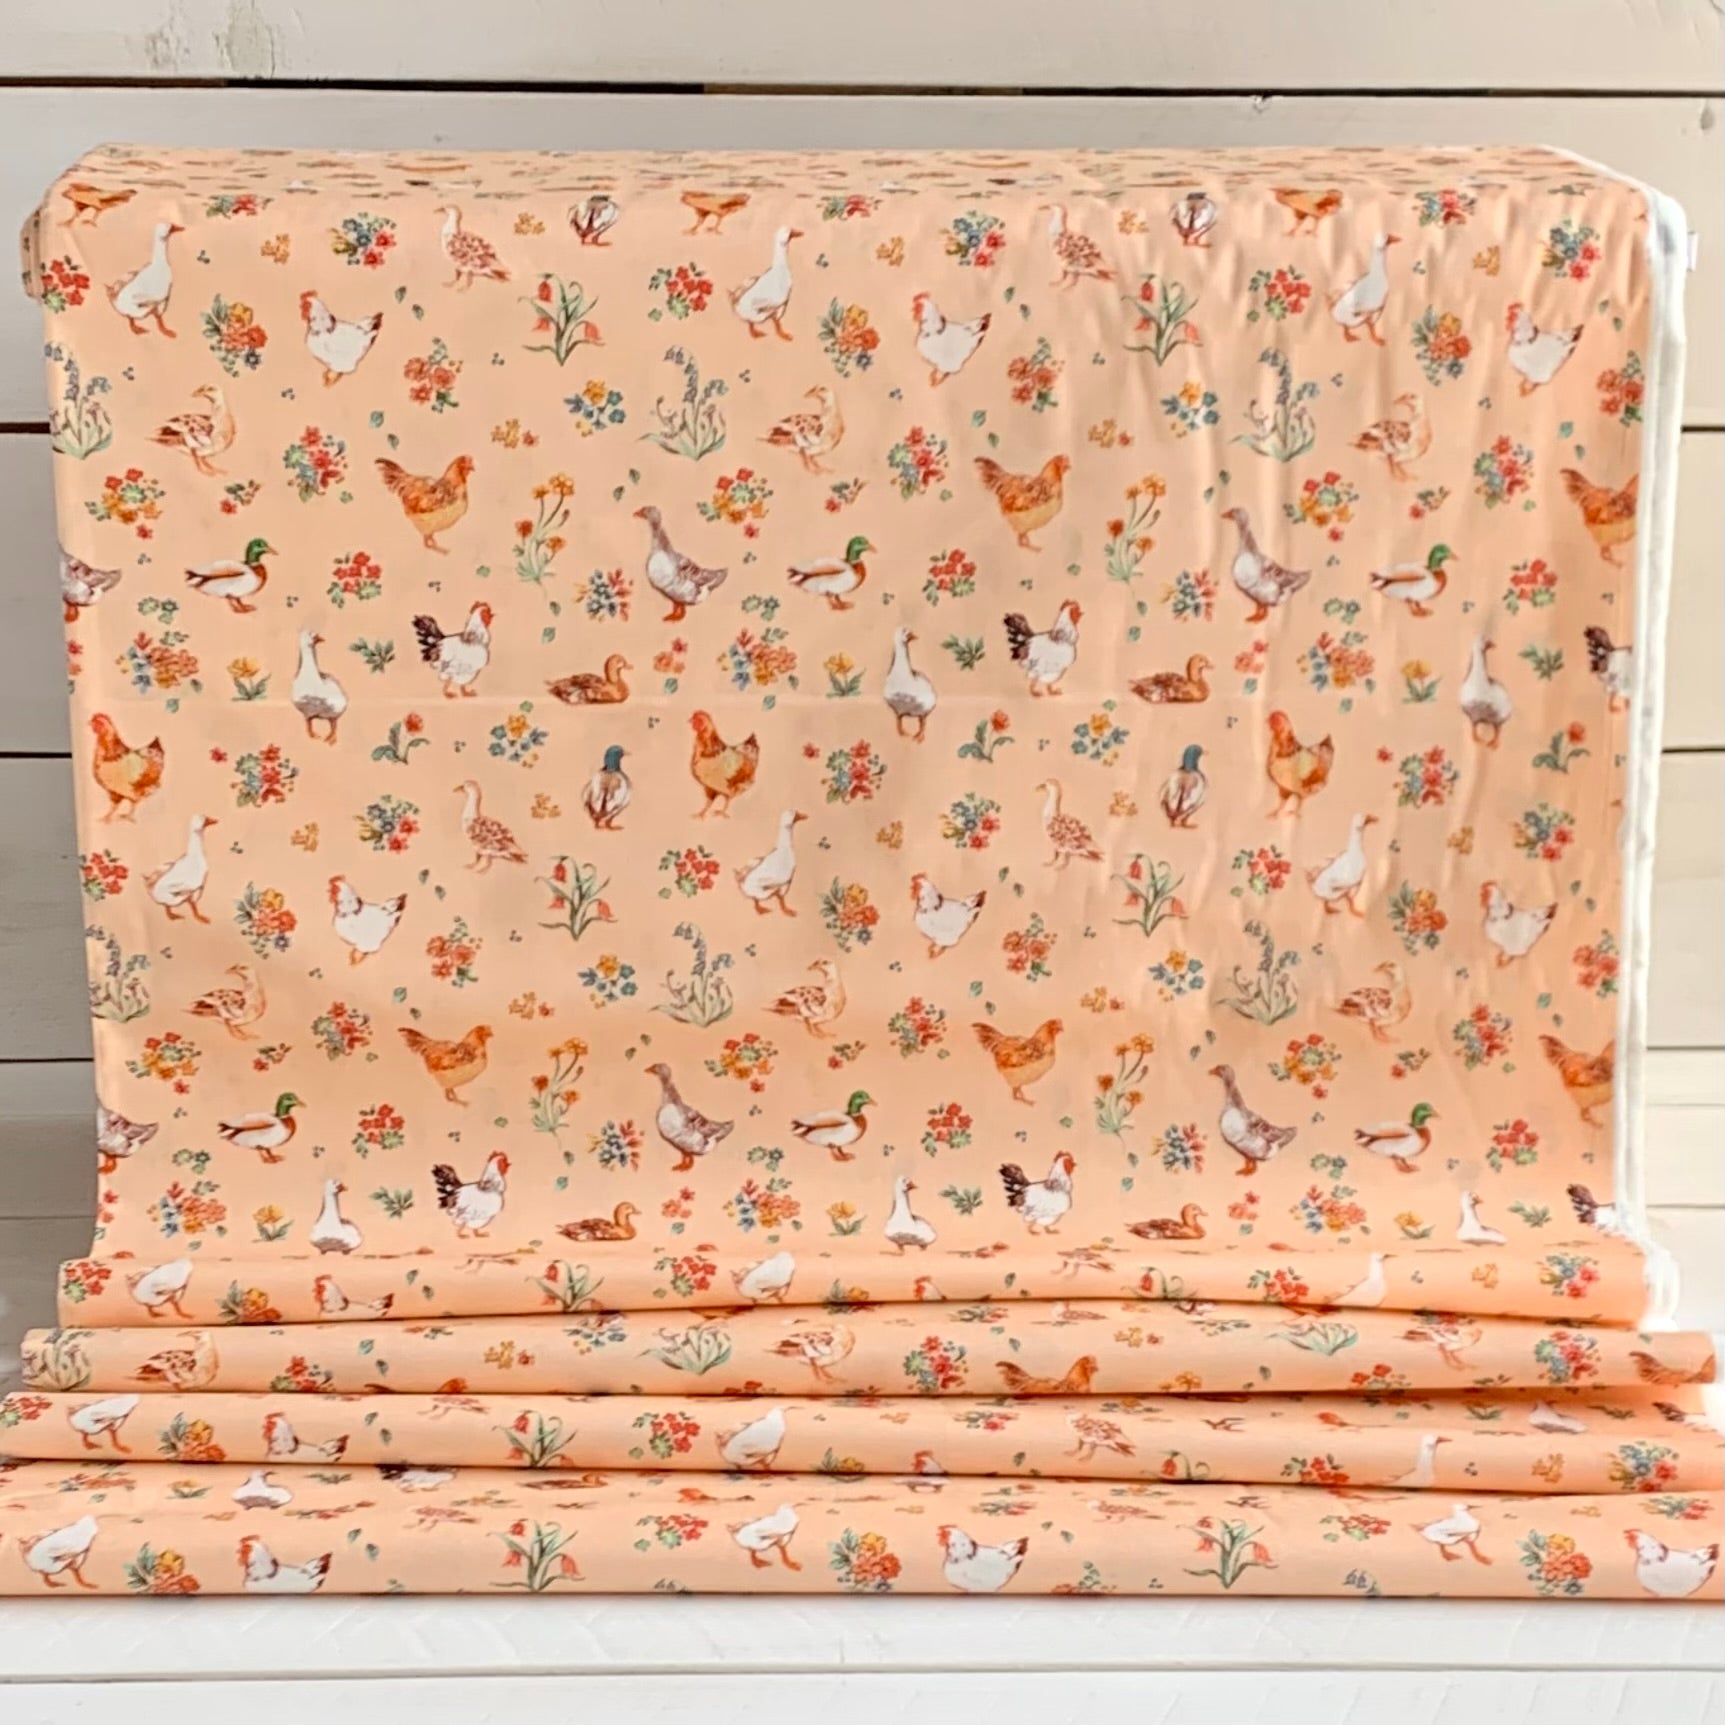 Farm Fowl, Farm Meadow by Clare Therese Gray Windham Fabrics - Peach 52795-8 Cotton Fabric